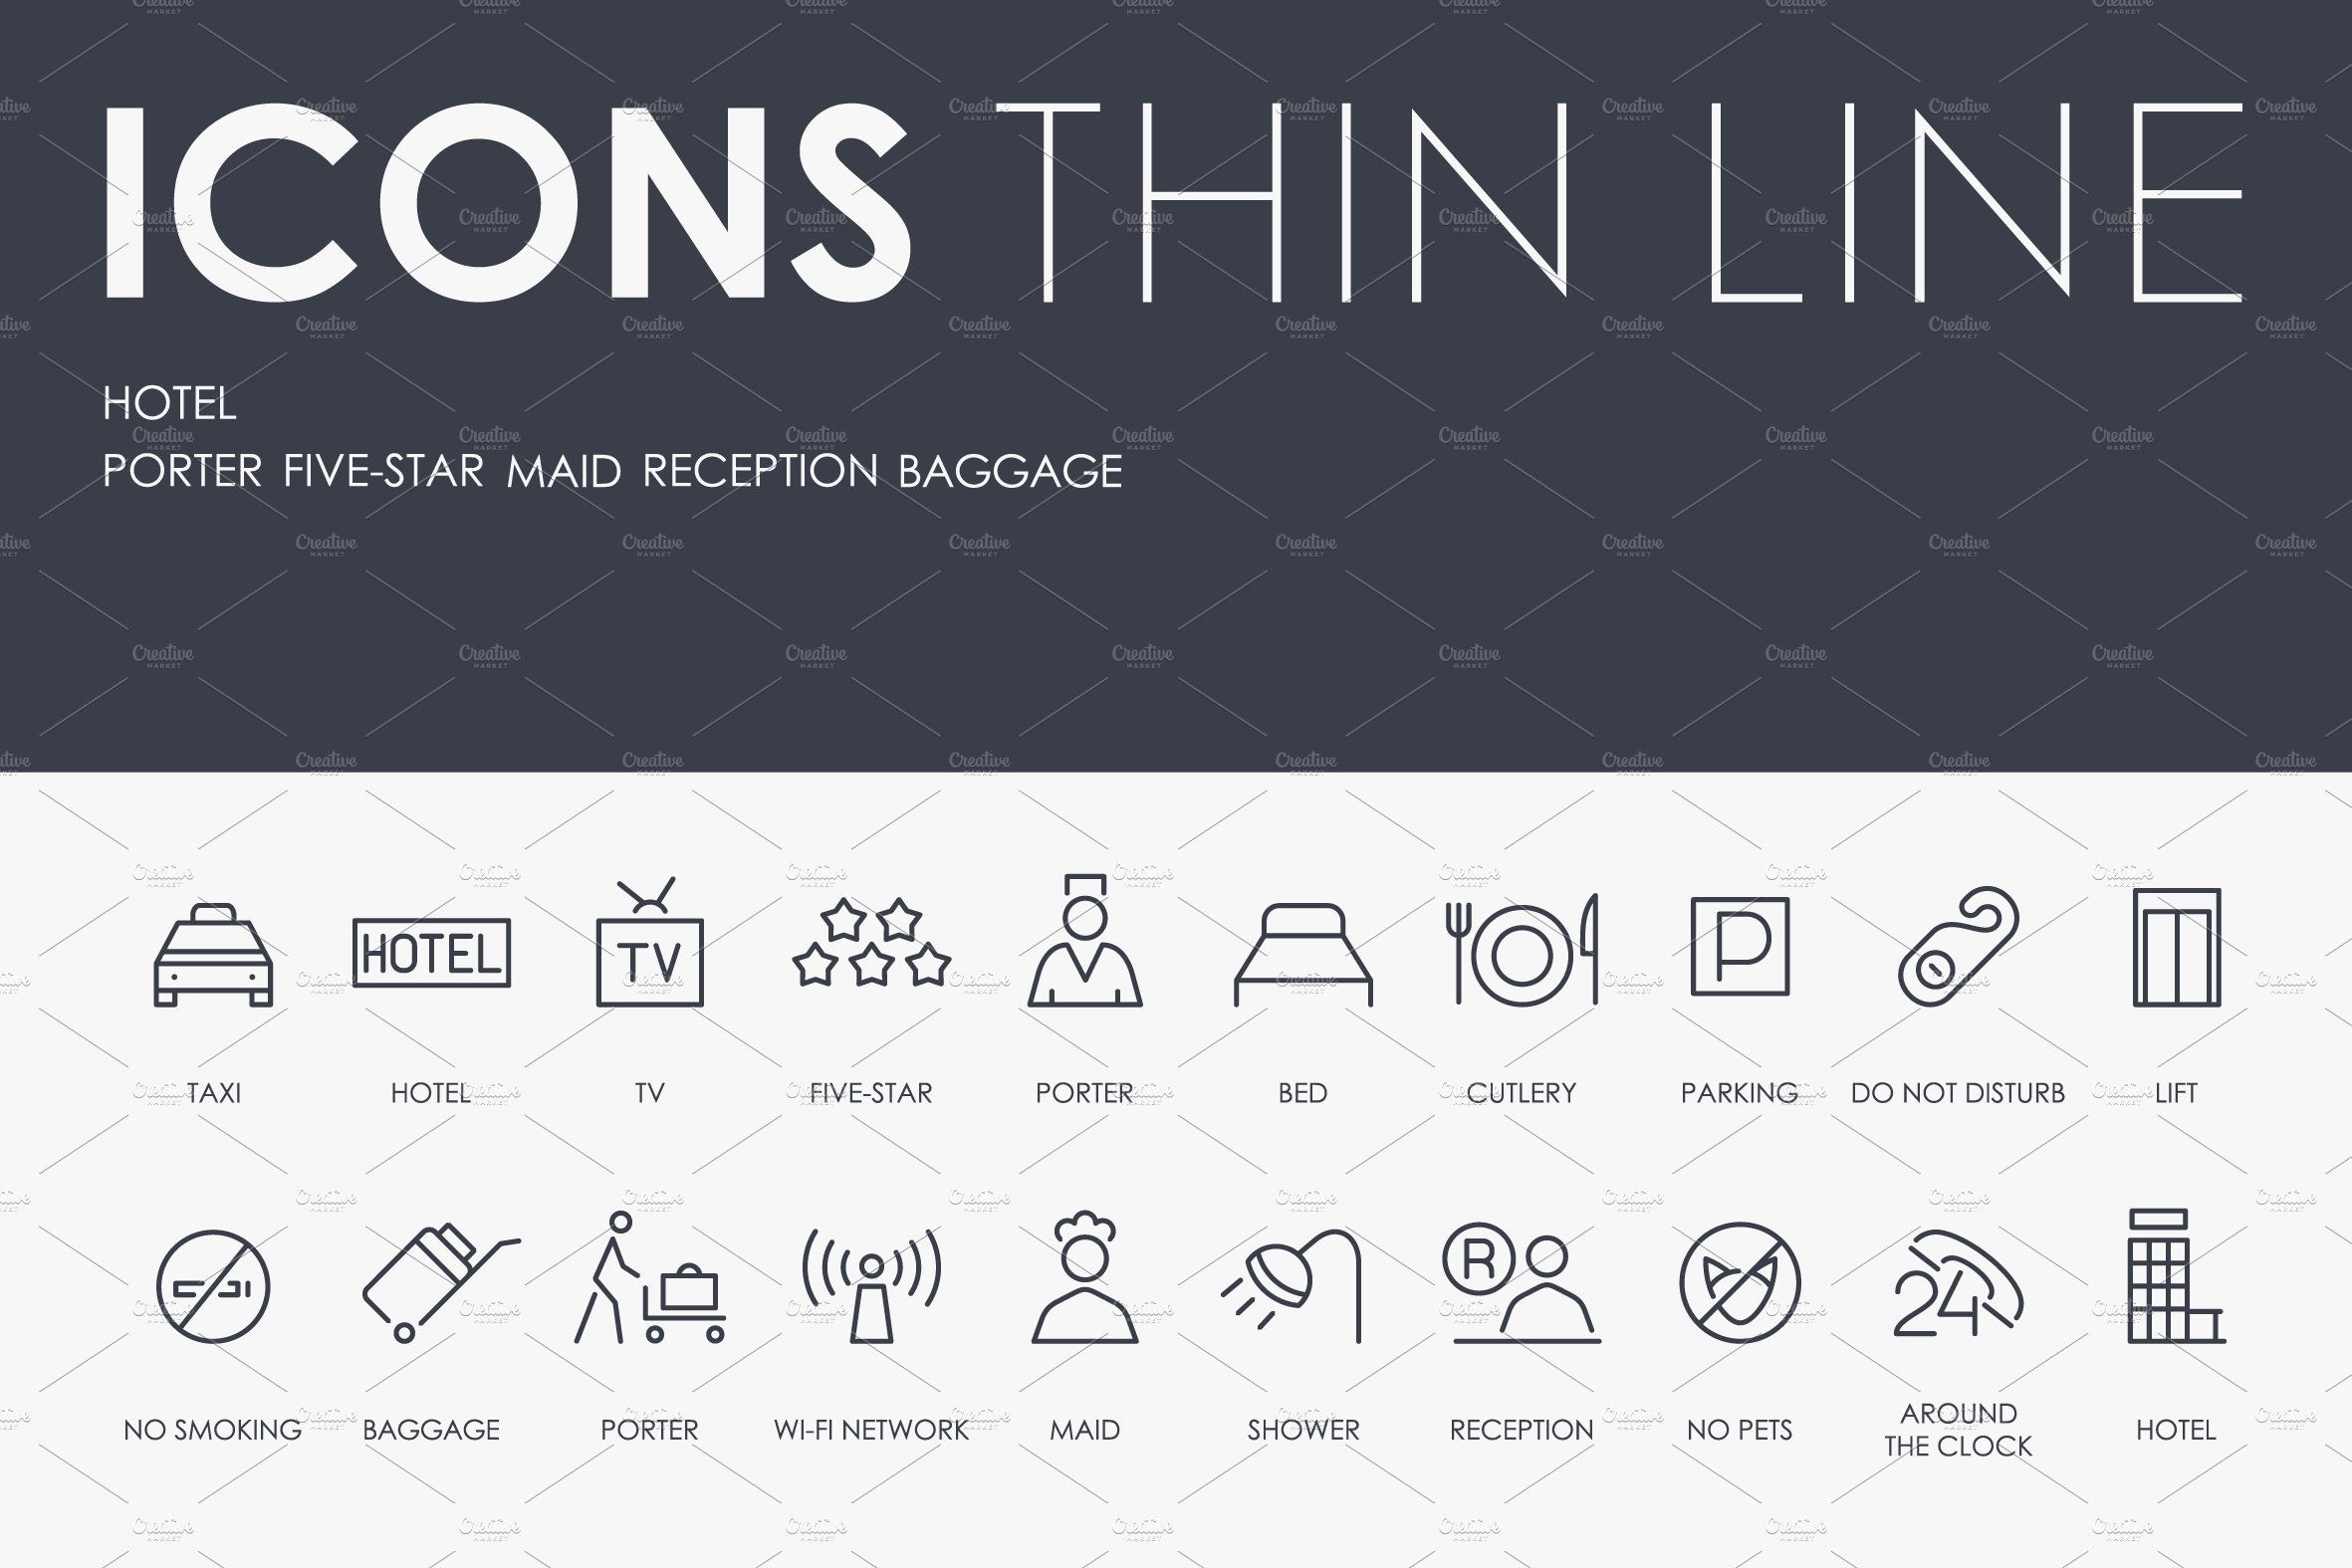 Hotel thinline icons cover image.